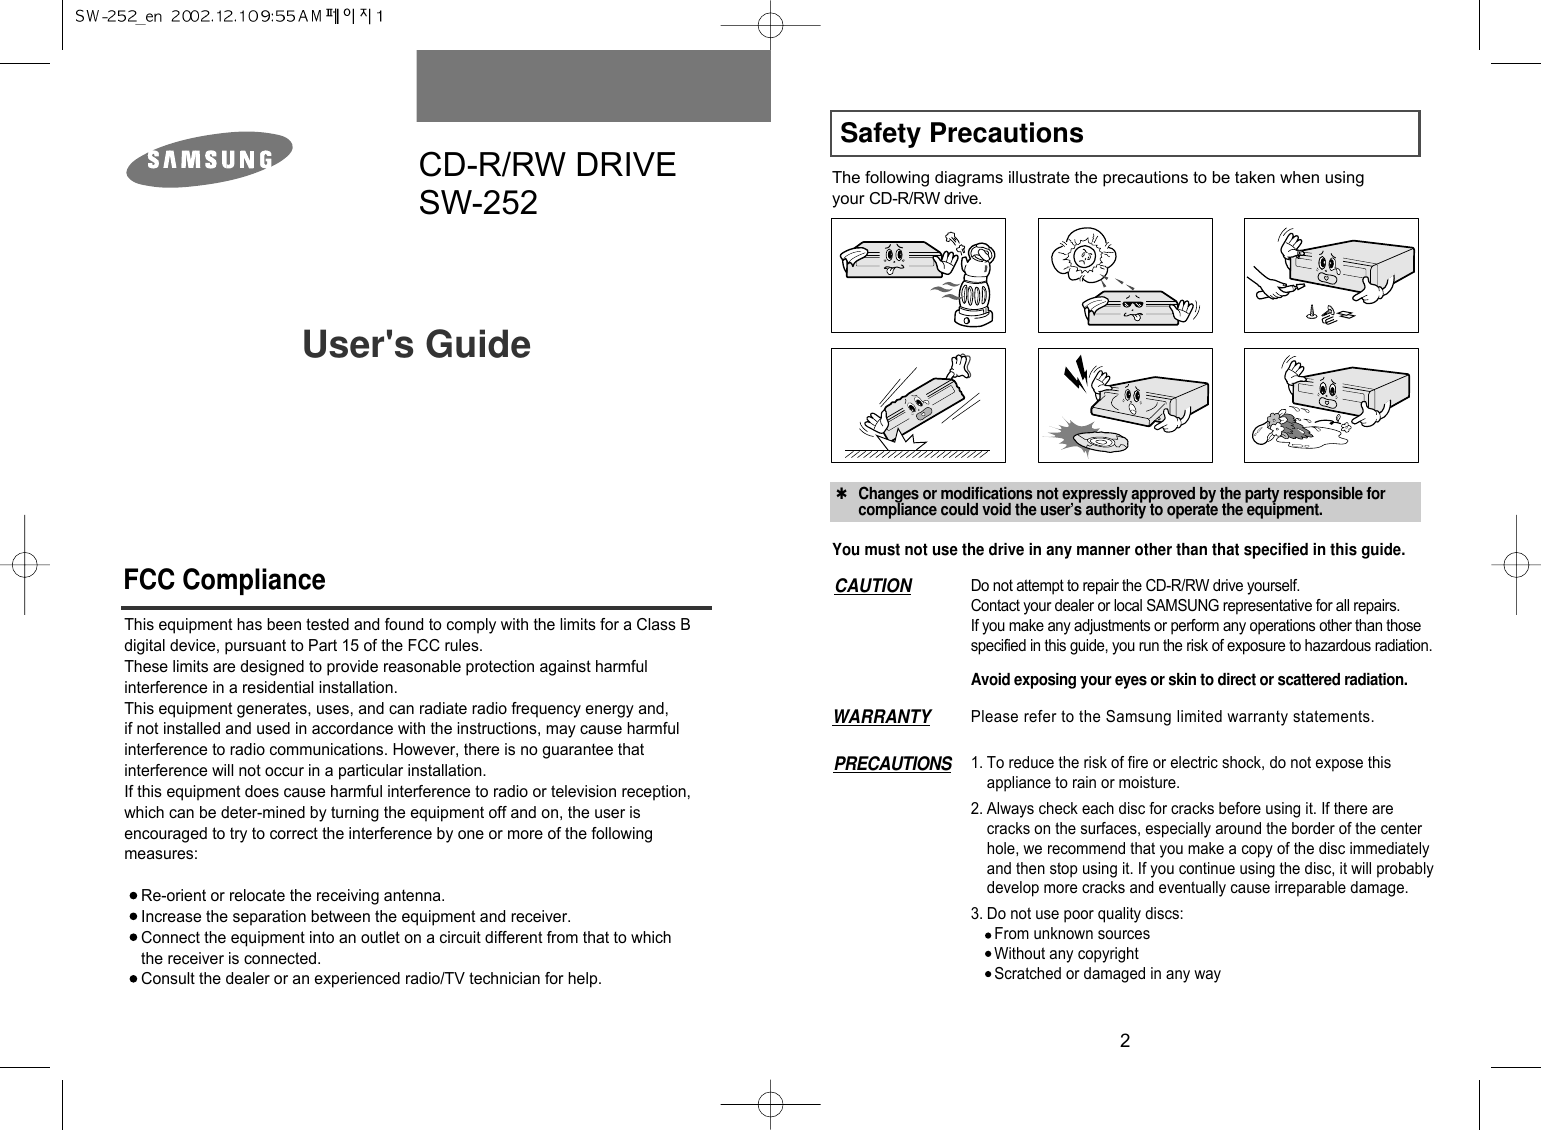 Safety Precautions2The following diagrams illustrate the precautions to be taken when usingyour CD-R/RW drive. ✱Changes or modifications not expressly approved by the party responsible forcompliance could void the user’s authority to operate the equipment.You must not use the drive in any manner other than that specified in this guide.Avoid exposing your eyes or skin to direct or scattered radiation.CAUTION Do not attempt to repair the CD-R/RW drive yourself.Contact your dealer or local SAMSUNG representative for all repairs.If you make any adjustments or perform any operations other than thosespecified in this guide, you run the risk of exposure to hazardous radiation.WARRANTY Please refer to the Samsung limited warranty statements.PRECAUTIONS 1. To reduce the risk of fire or electric shock, do not expose thisappliance to rain or moisture.2. Always check each disc for cracks before using it. If there arecracks on the surfaces, especially around the border of the centerhole, we recommend that you make a copy of the disc immediatelyand then stop using it. If you continue using the disc, it will probablydevelop more cracks and eventually cause irreparable damage.3. Do not use poor quality discs:From unknown sourcesWithout any copyrightScratched or damaged in any wayCD-R/RW DRIVESW-252User&apos;s Guide FCC ComplianceThis equipment has been tested and found to comply with the limits for a Class Bdigital device, pursuant to Part 15 of the FCC rules.These limits are designed to provide reasonable protection against harmfulinterference in a residential installation.This equipment generates, uses, and can radiate radio frequency energy and,if not installed and used in accordance with the instructions, may cause harmfulinterference to radio communications. However, there is no guarantee thatinterference will not occur in a particular installation.If this equipment does cause harmful interference to radio or television reception,which can be deter-mined by turning the equipment off and on, the user isencouraged to try to correct the interference by one or more of the followingmeasures:Re-orient or relocate the receiving antenna.Increase the separation between the equipment and receiver.Connect the equipment into an outlet on a circuit different from that to whichthe receiver is connected.Consult the dealer or an experienced radio/TV technician for help.